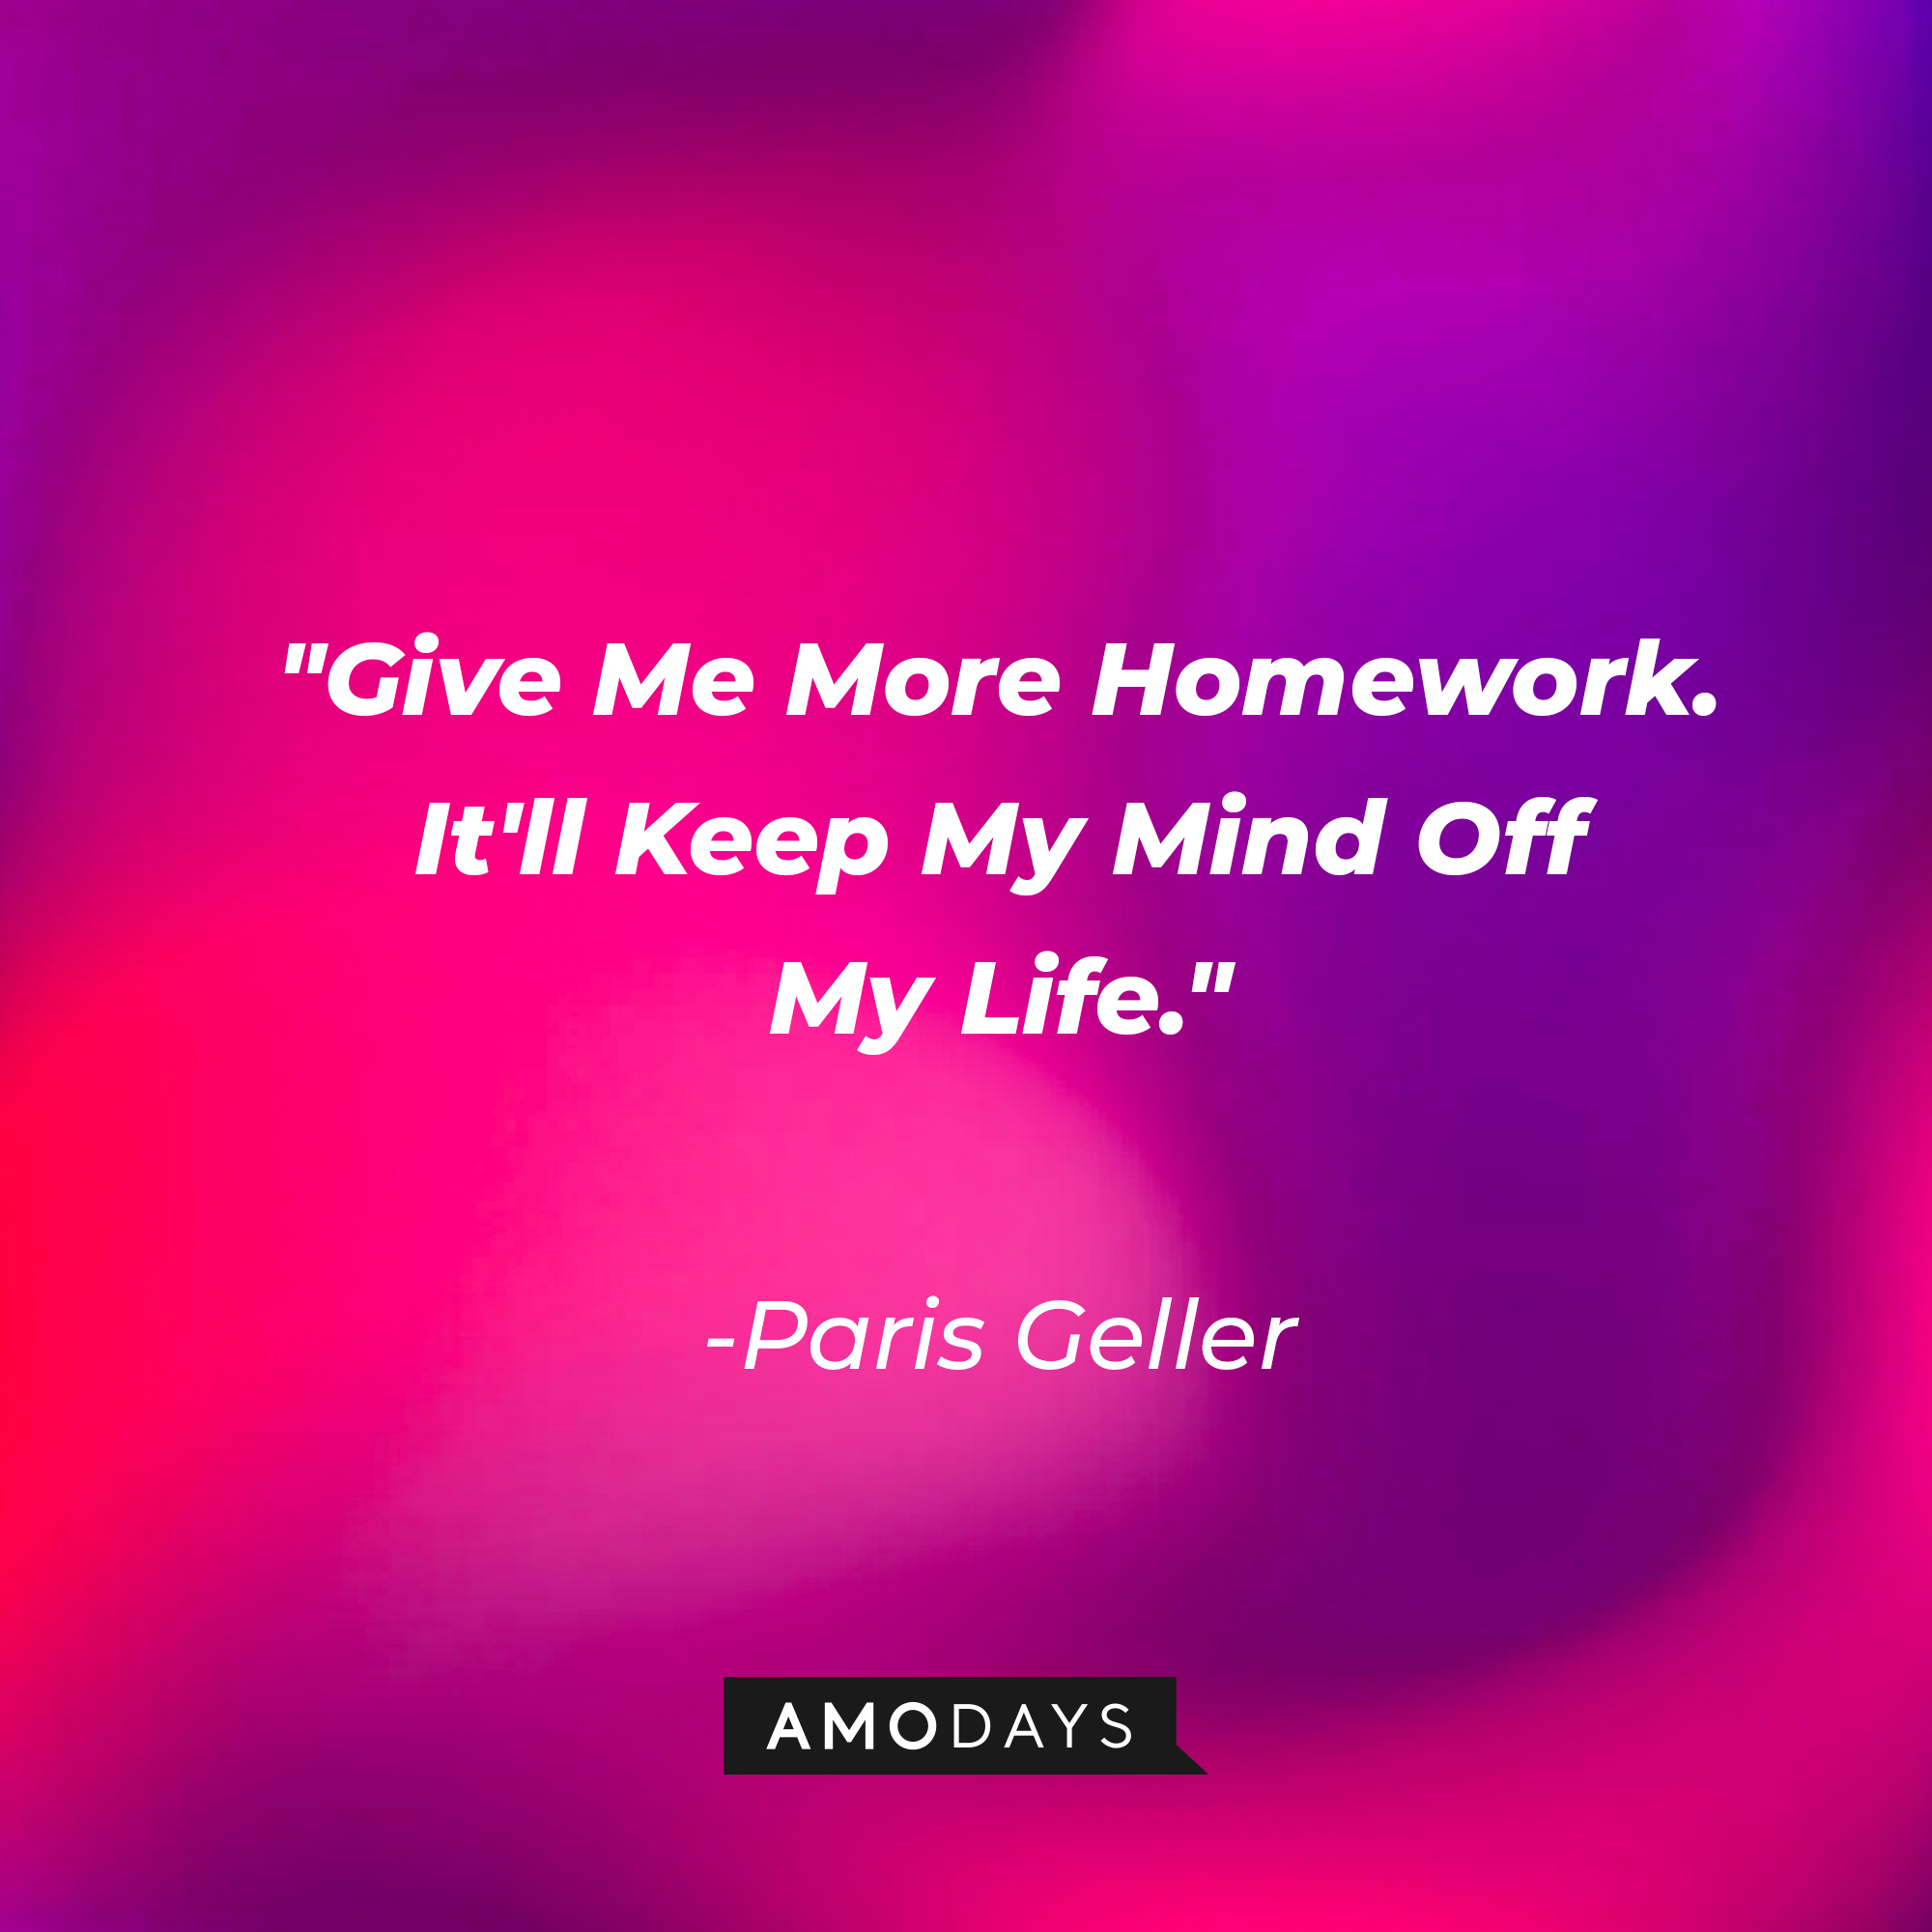 Paris Geller’s quote: “Give Me More Homework. It'll Keep My Mind Off My Life.” | Source: AmoDays